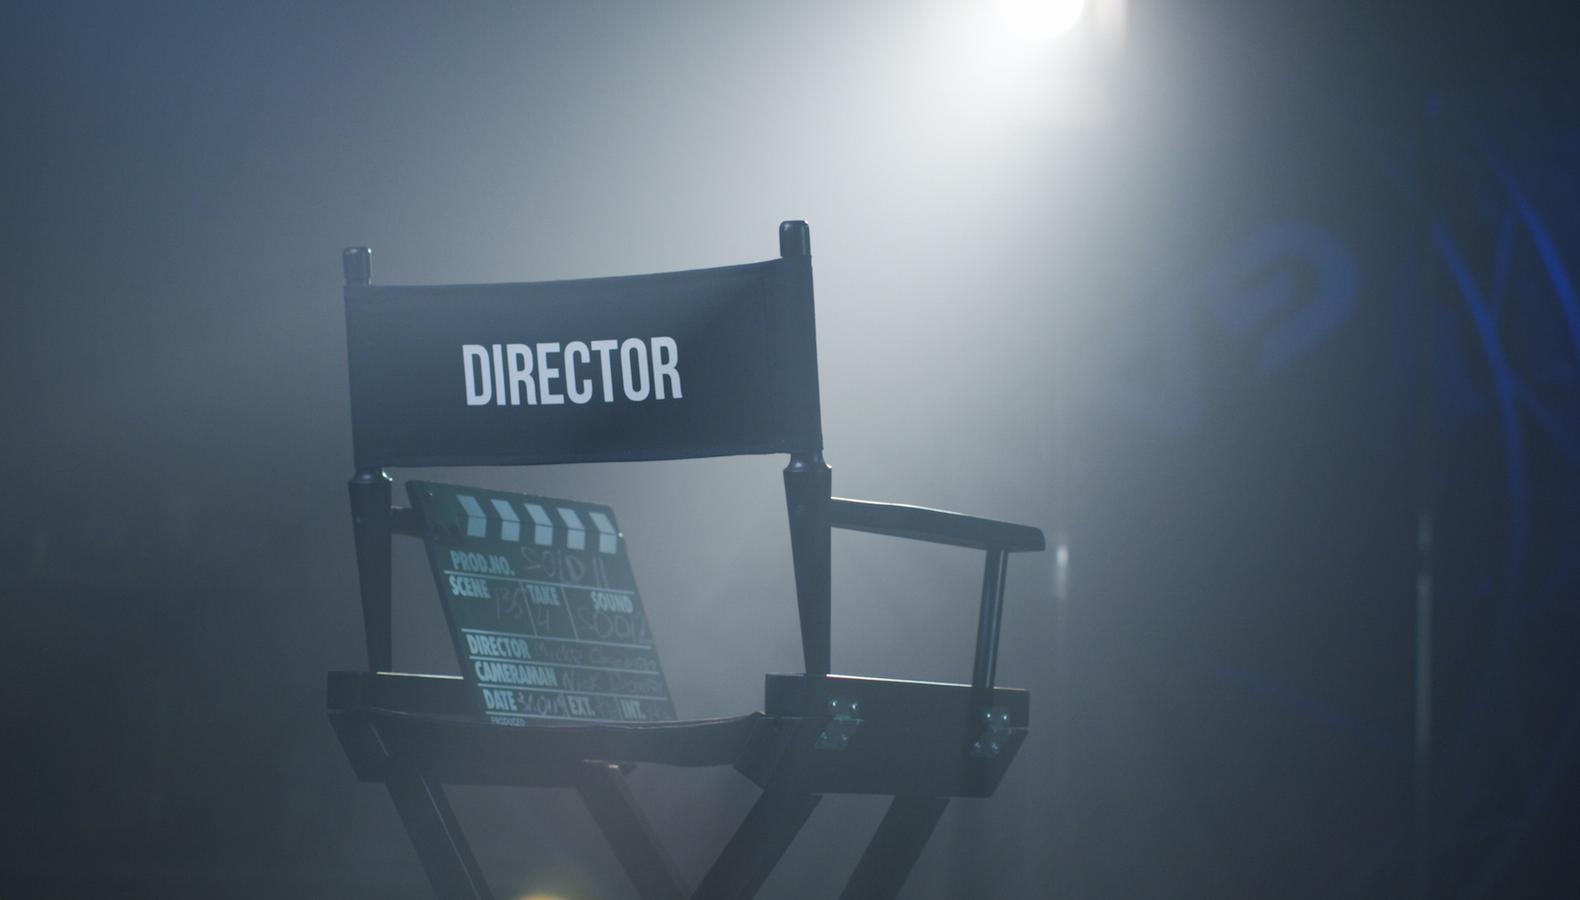 Director chair with a spotlight shining on it